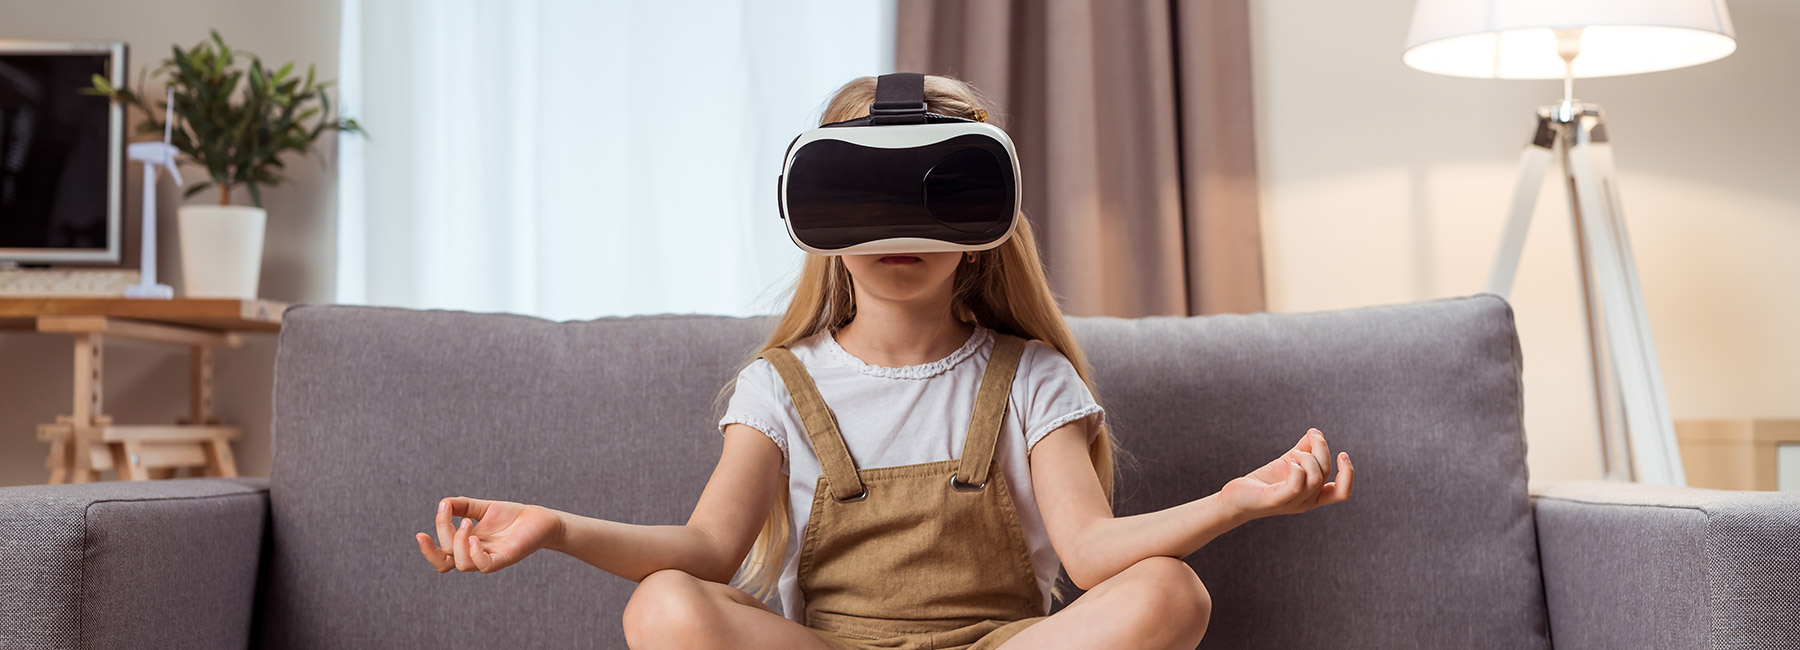 Girl meditating on a couch while wearing a virtual reality headset